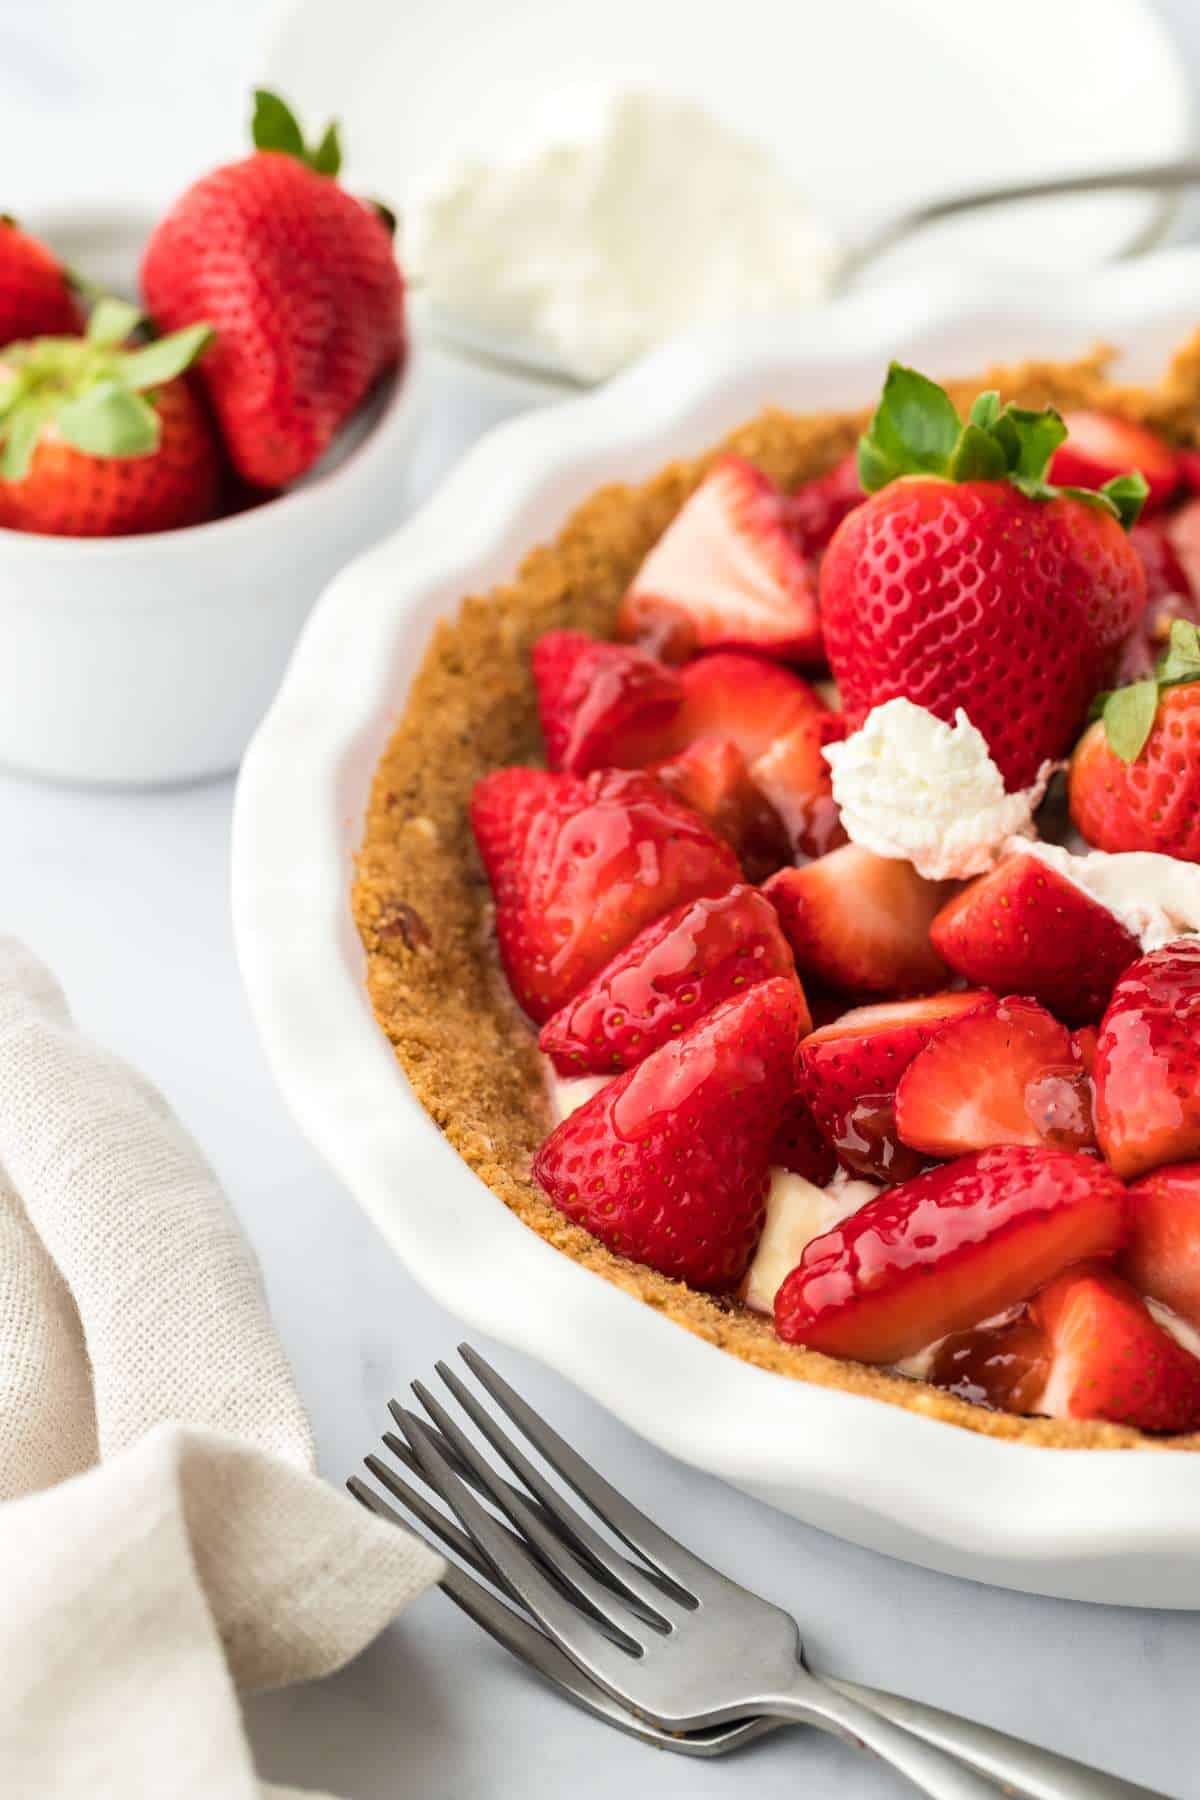 A strawberry tart on the table with only half of the dish showing and a bowl of strawberries in the background.